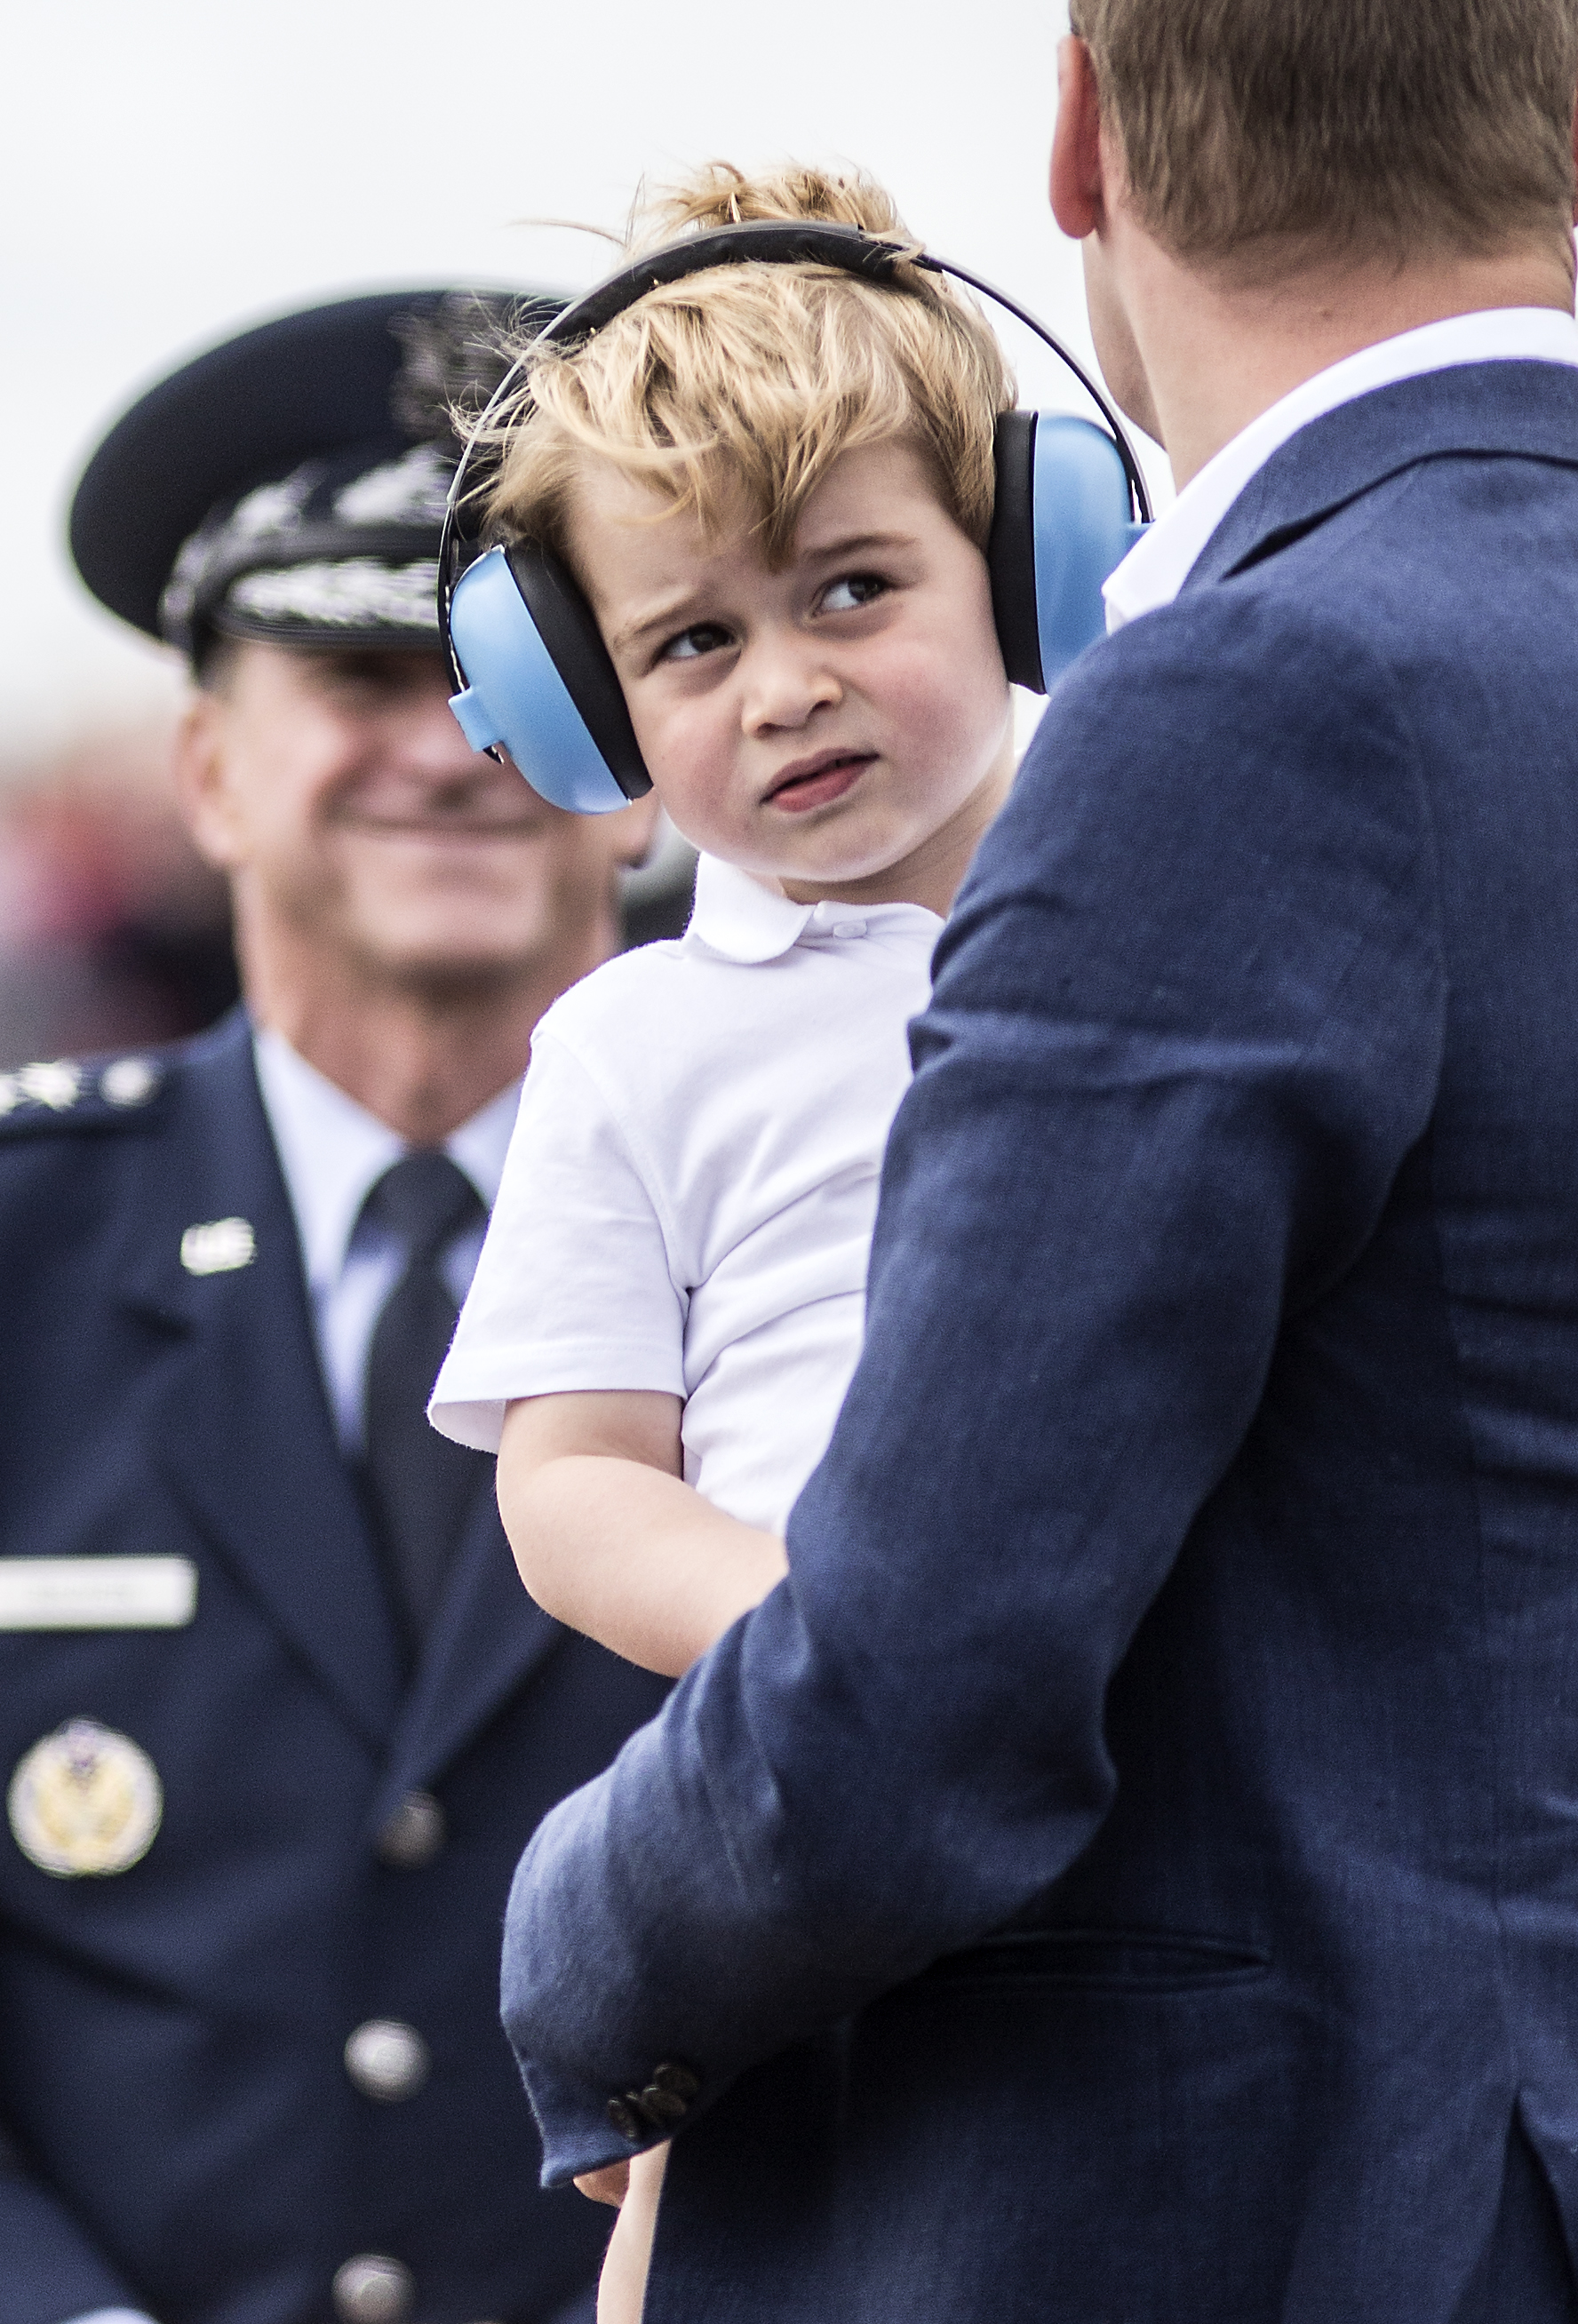 FAIRFORD, WALES - JULY 08: Prince George wears ear defenders as he is carried by Prince William, Duke of Cambridge during a visit to the Royal International Air Tattoo at RAF Fairford on July 8, 2016 in Fairford, England.  (Photo by Richard Pohle - WPA Pool/Getty Images)